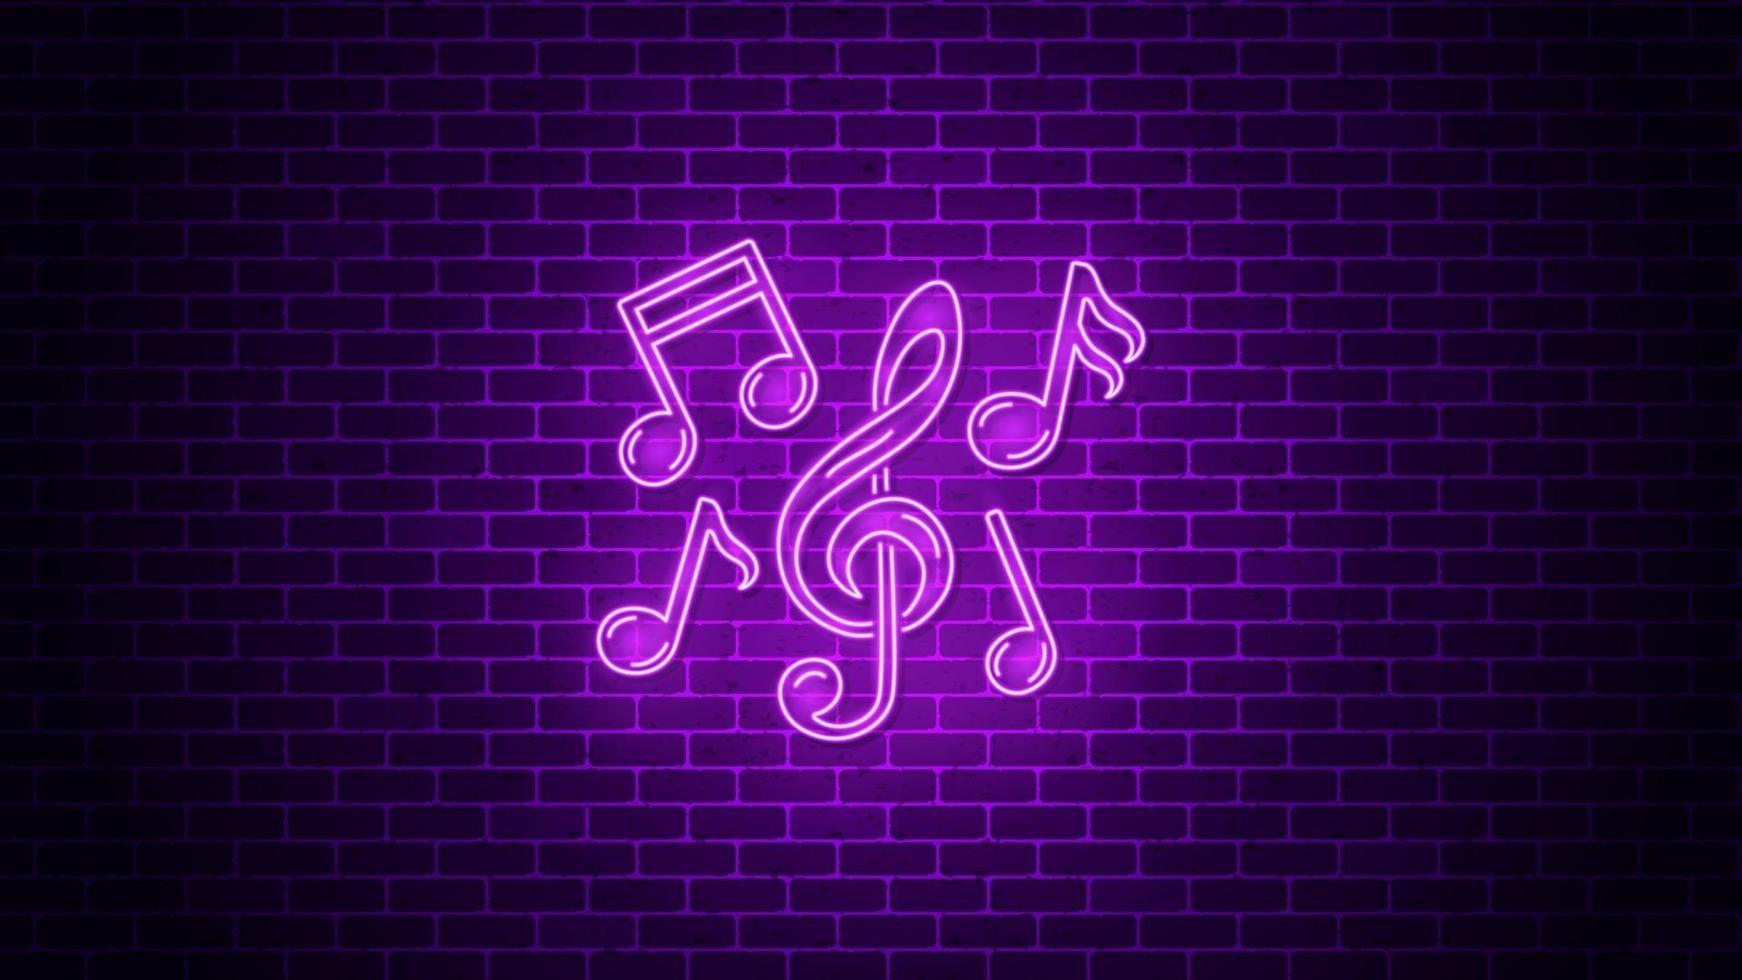 Music notes neon sign. Vector illustration.